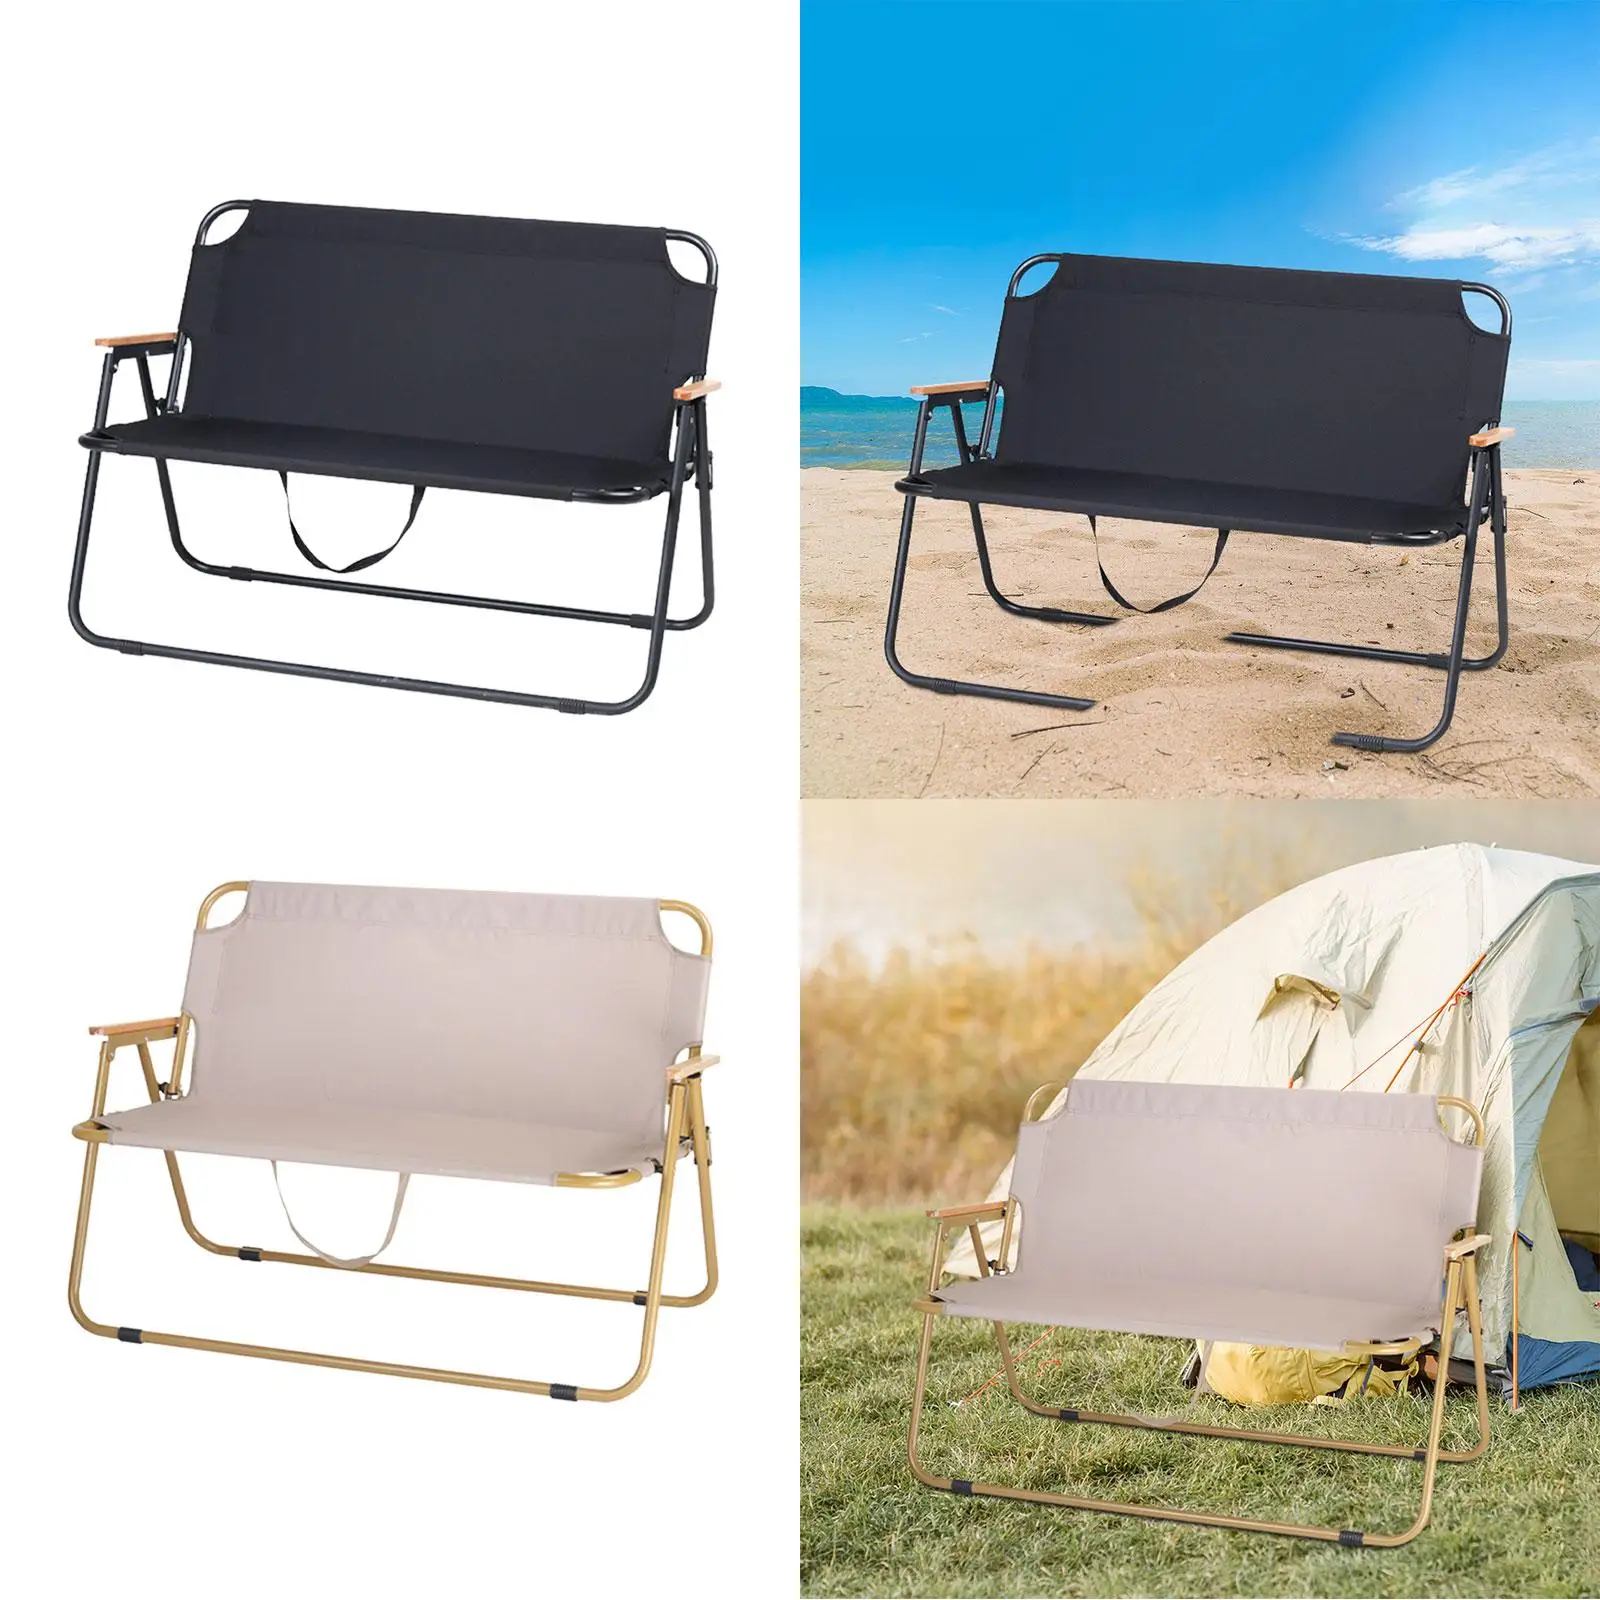 Folding Camping Chair Traveling Camping Seat Patio Hiking Outside Lightweight Camping Stool Chair Outdoor Beach Chair Armchair